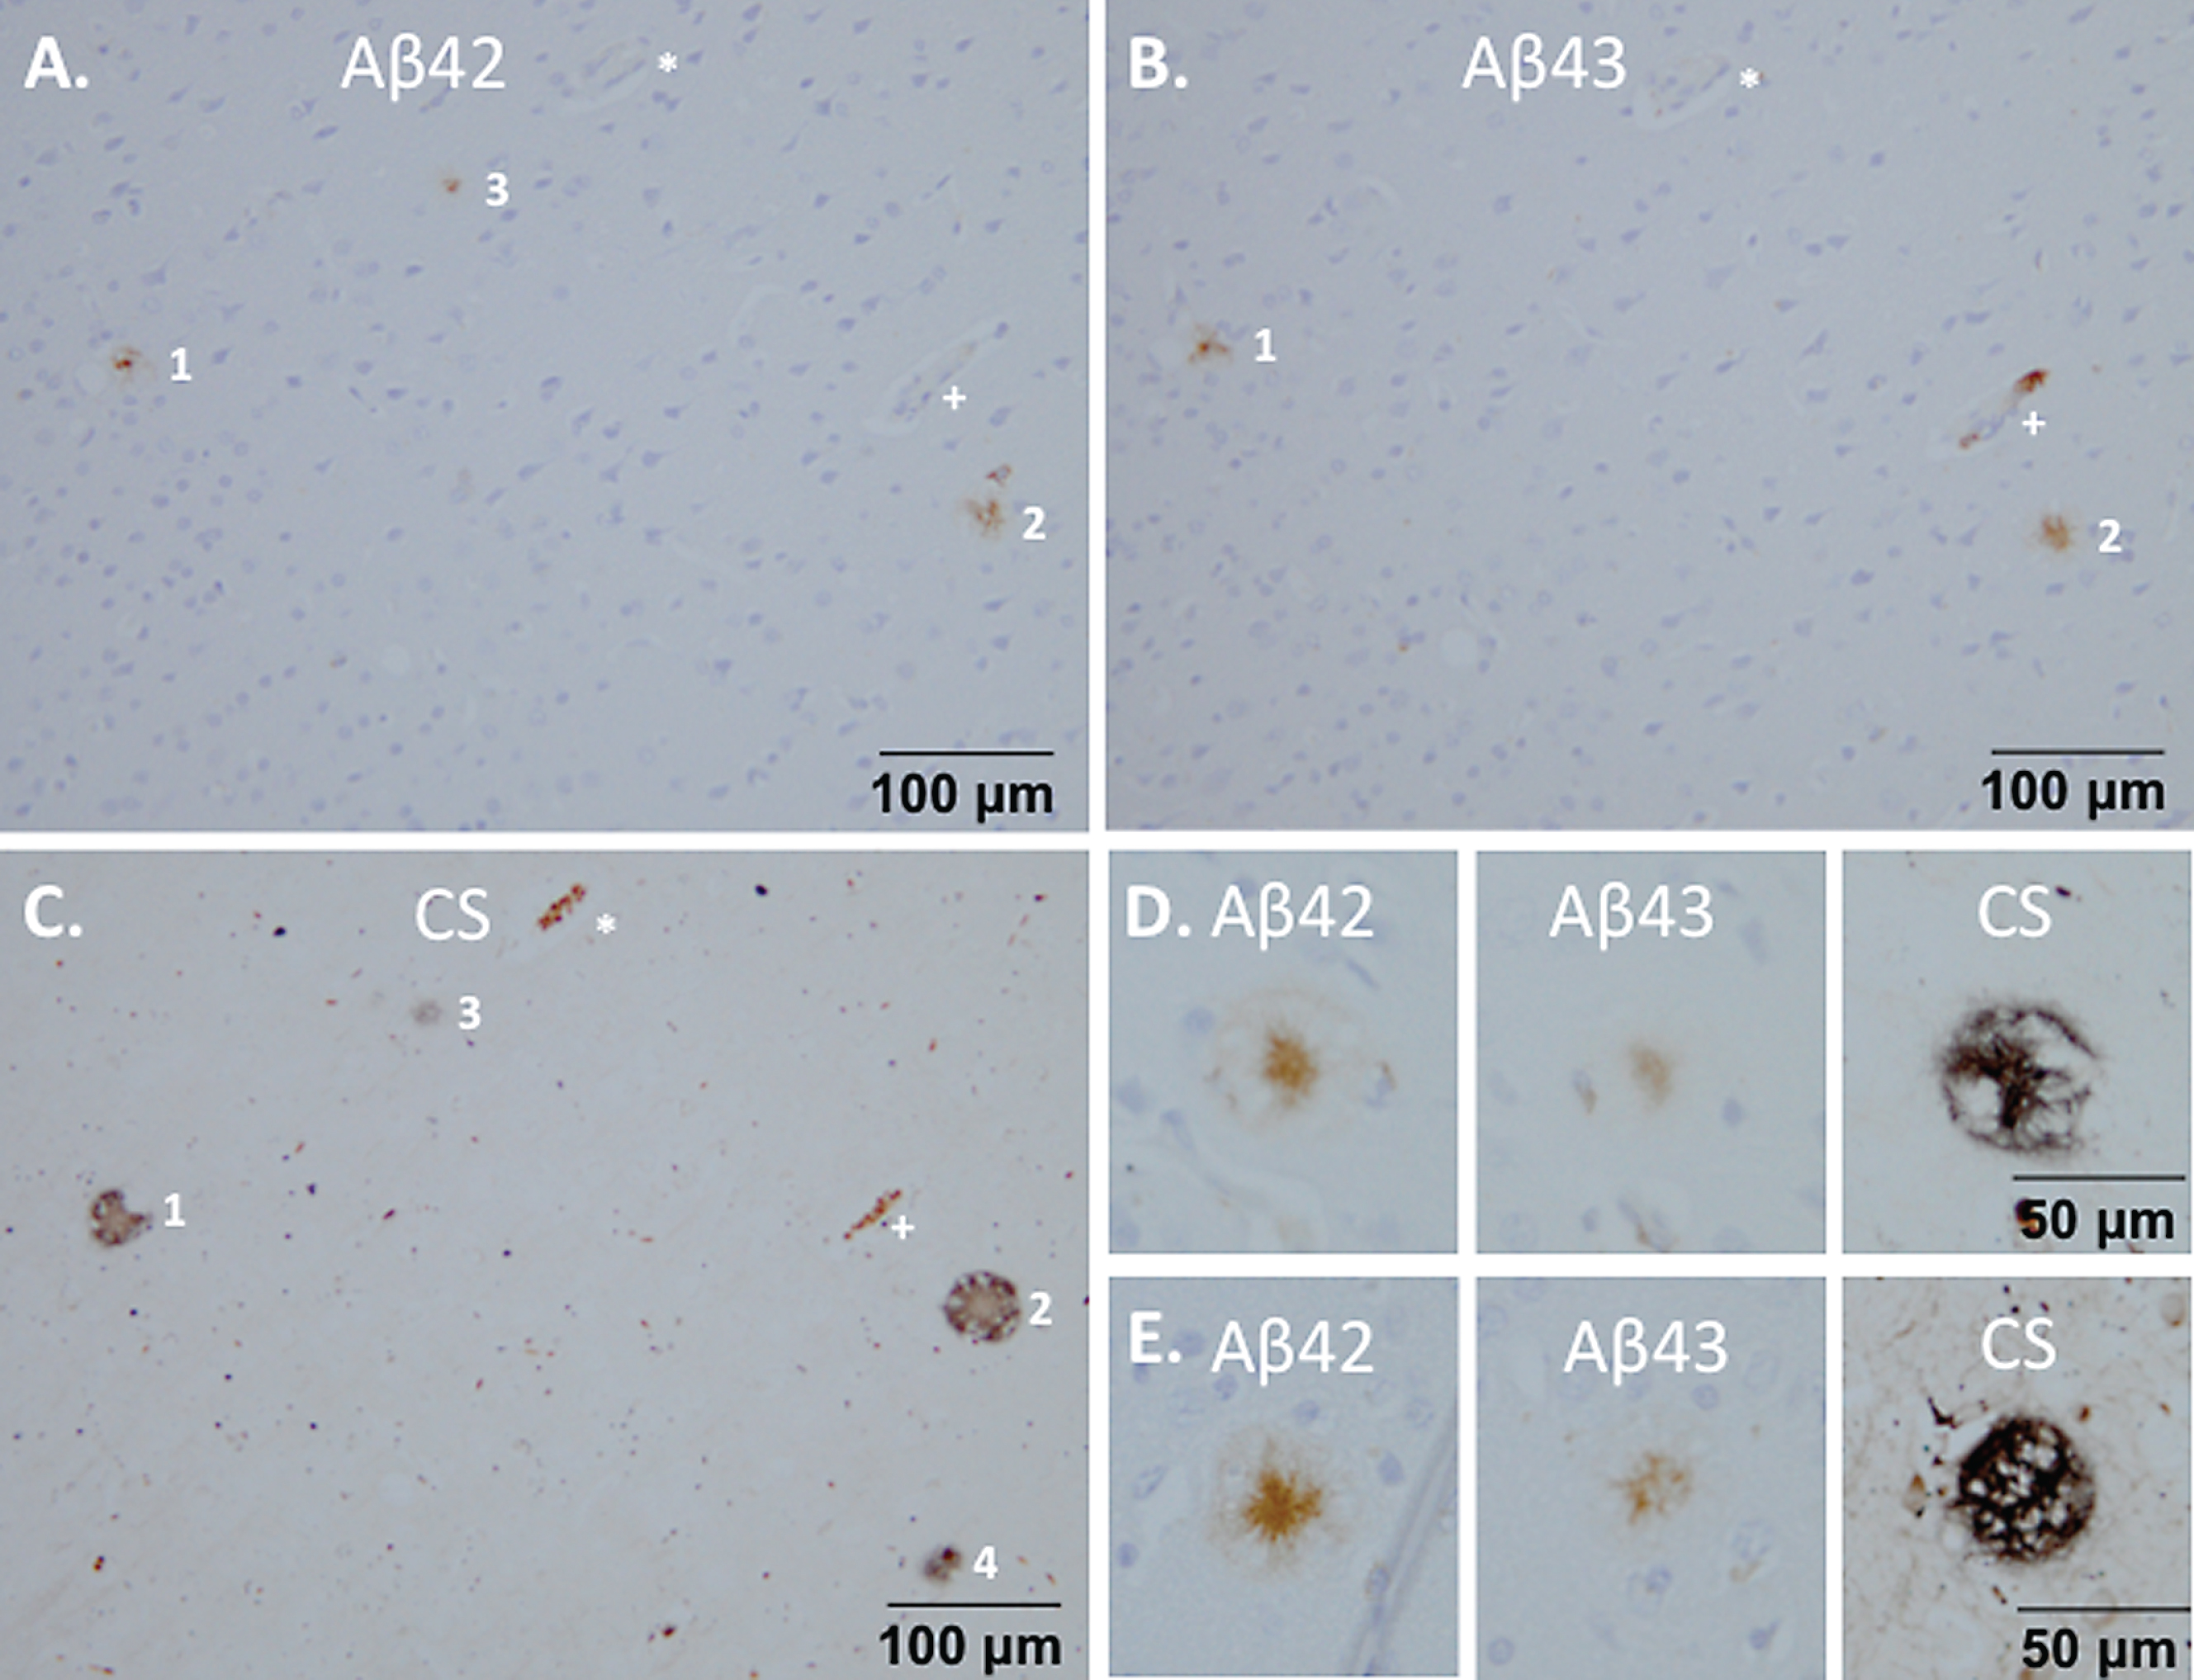 Composition of the plaques on brain sections from monkey m9856. Co-localization of Aβ42 (A) and Aβ43 (B) in plaques 1 and 2 are shown, which were also visible with the Campbell-Switzer staining (C). Plaque 3 was only Aβ42 positive and Campbell-Switzer positive. The vessels indicated by the asterisk (*) and plus (+) symbols, were used for navigation. Aβ42 mainly stained the center of the plaque, but also the outer circle, whereas Aβ43 only stains the center of the Campbell-Switzer positive plaque (D, E). CS, Campbell-Switzer staining; Aβ, amyloid-beta.